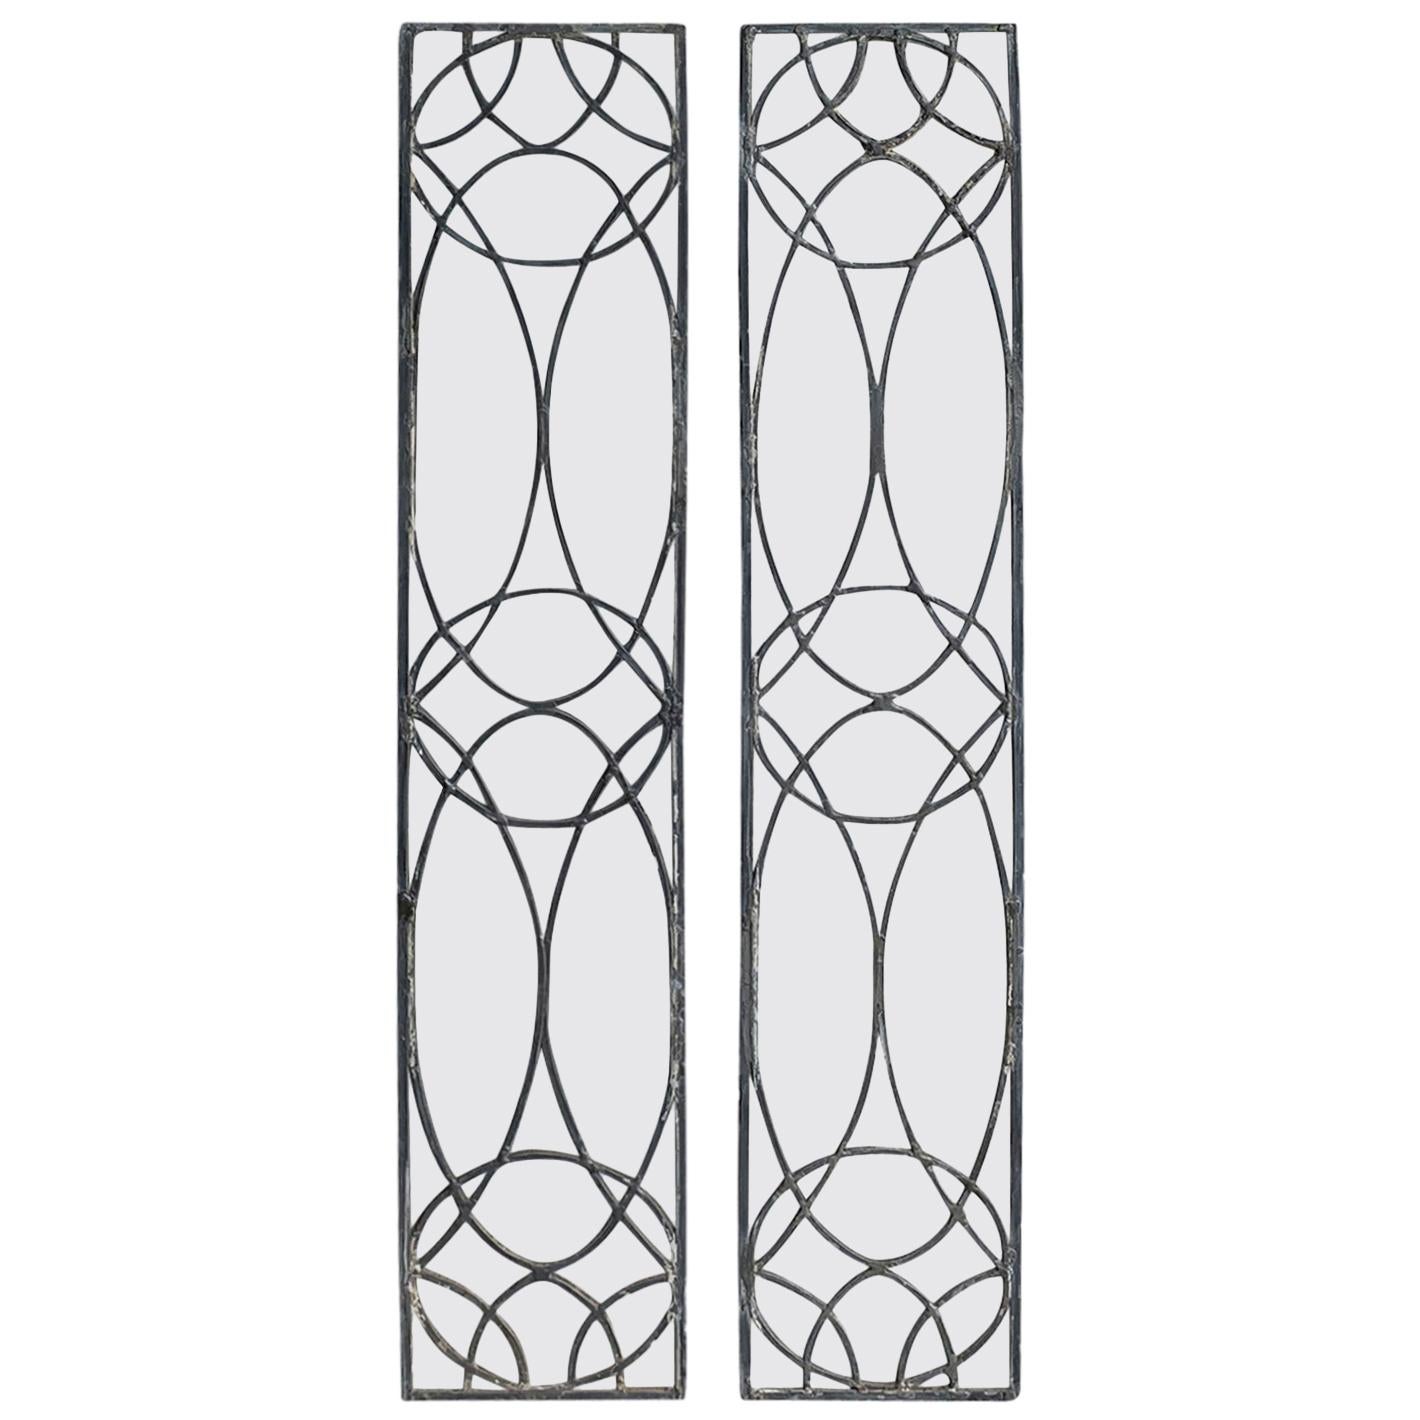 Pair of 19th-20th Century Leaded Glass Architectural Panes / Transoms For Sale